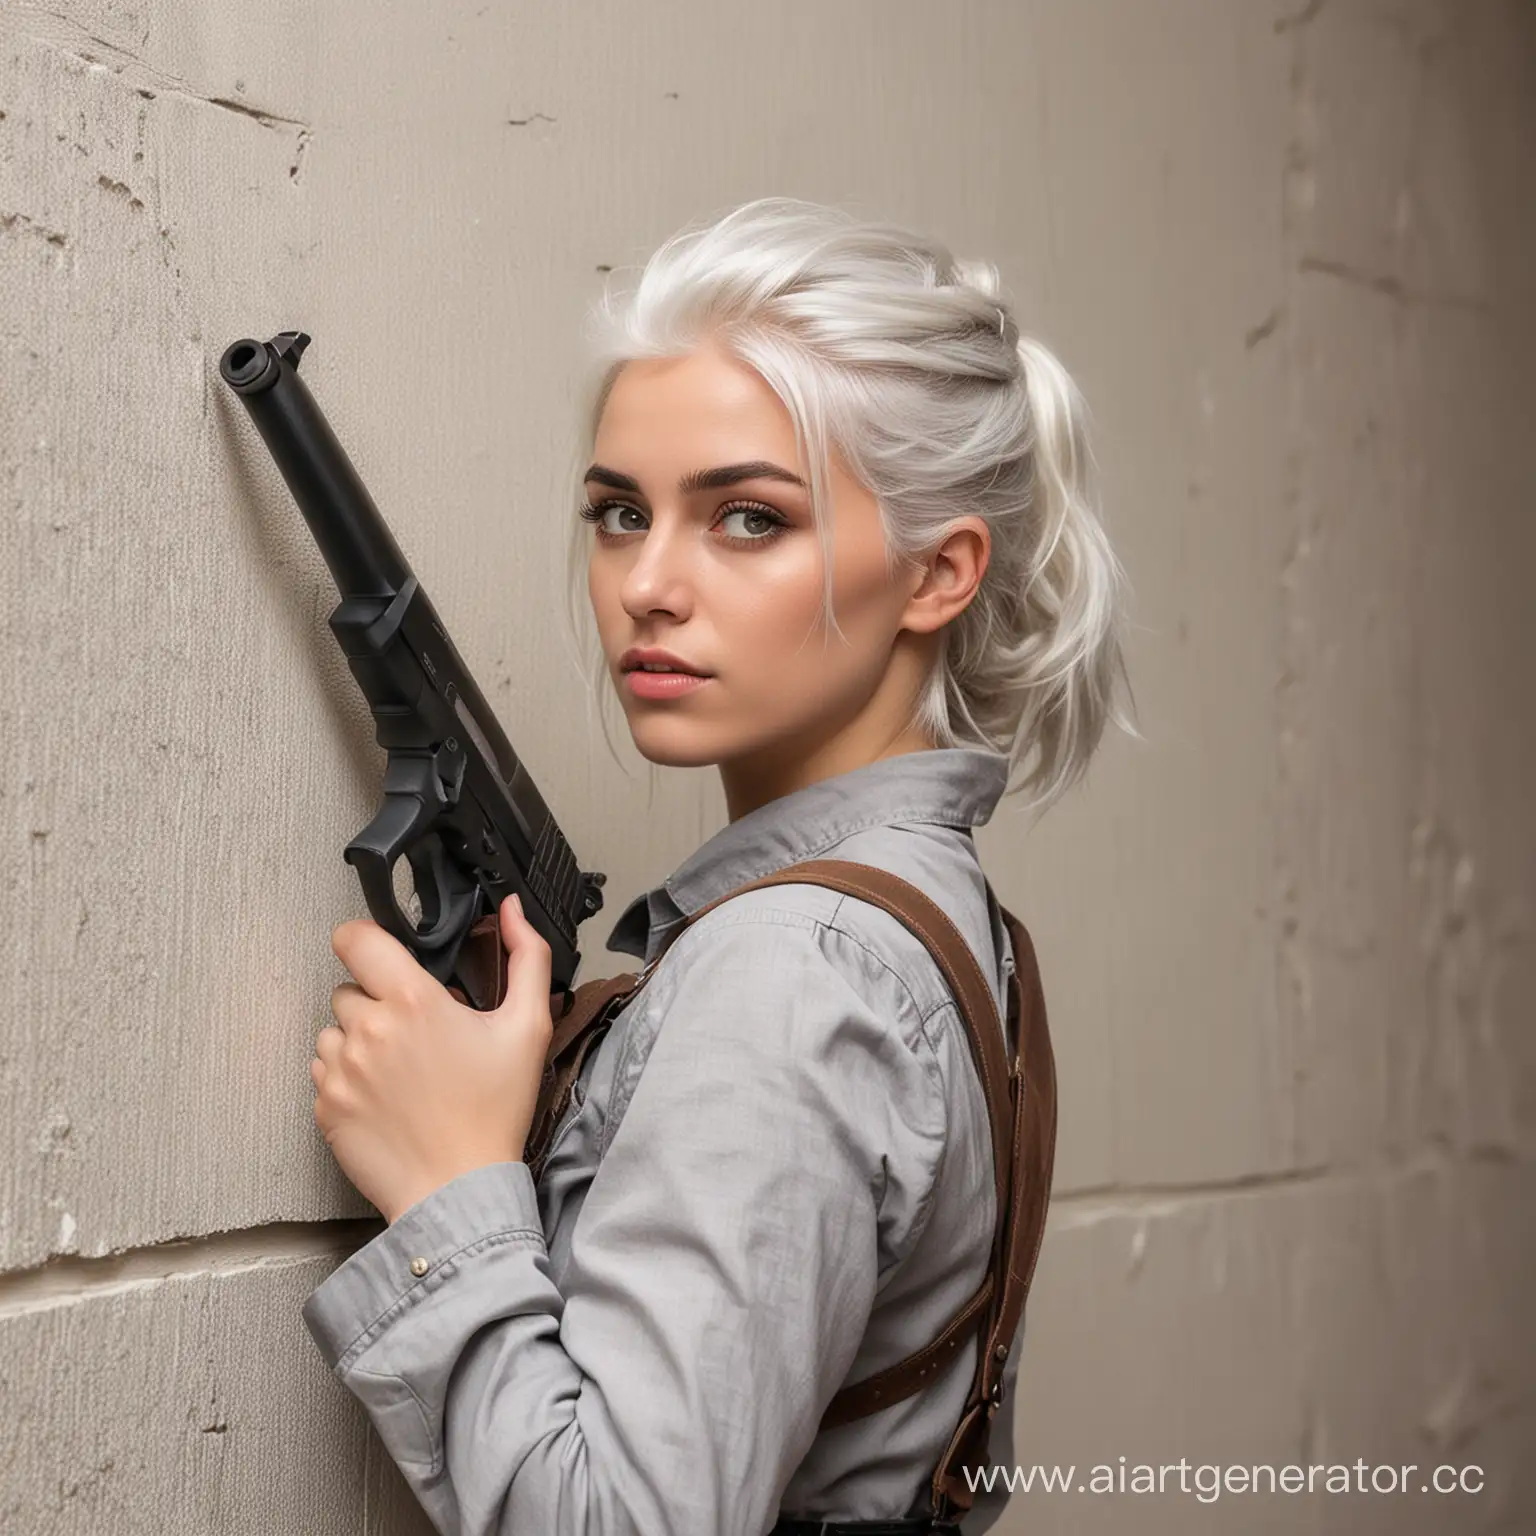 Fierce-Girl-with-White-Hair-Holding-a-Firearm-Against-Wall